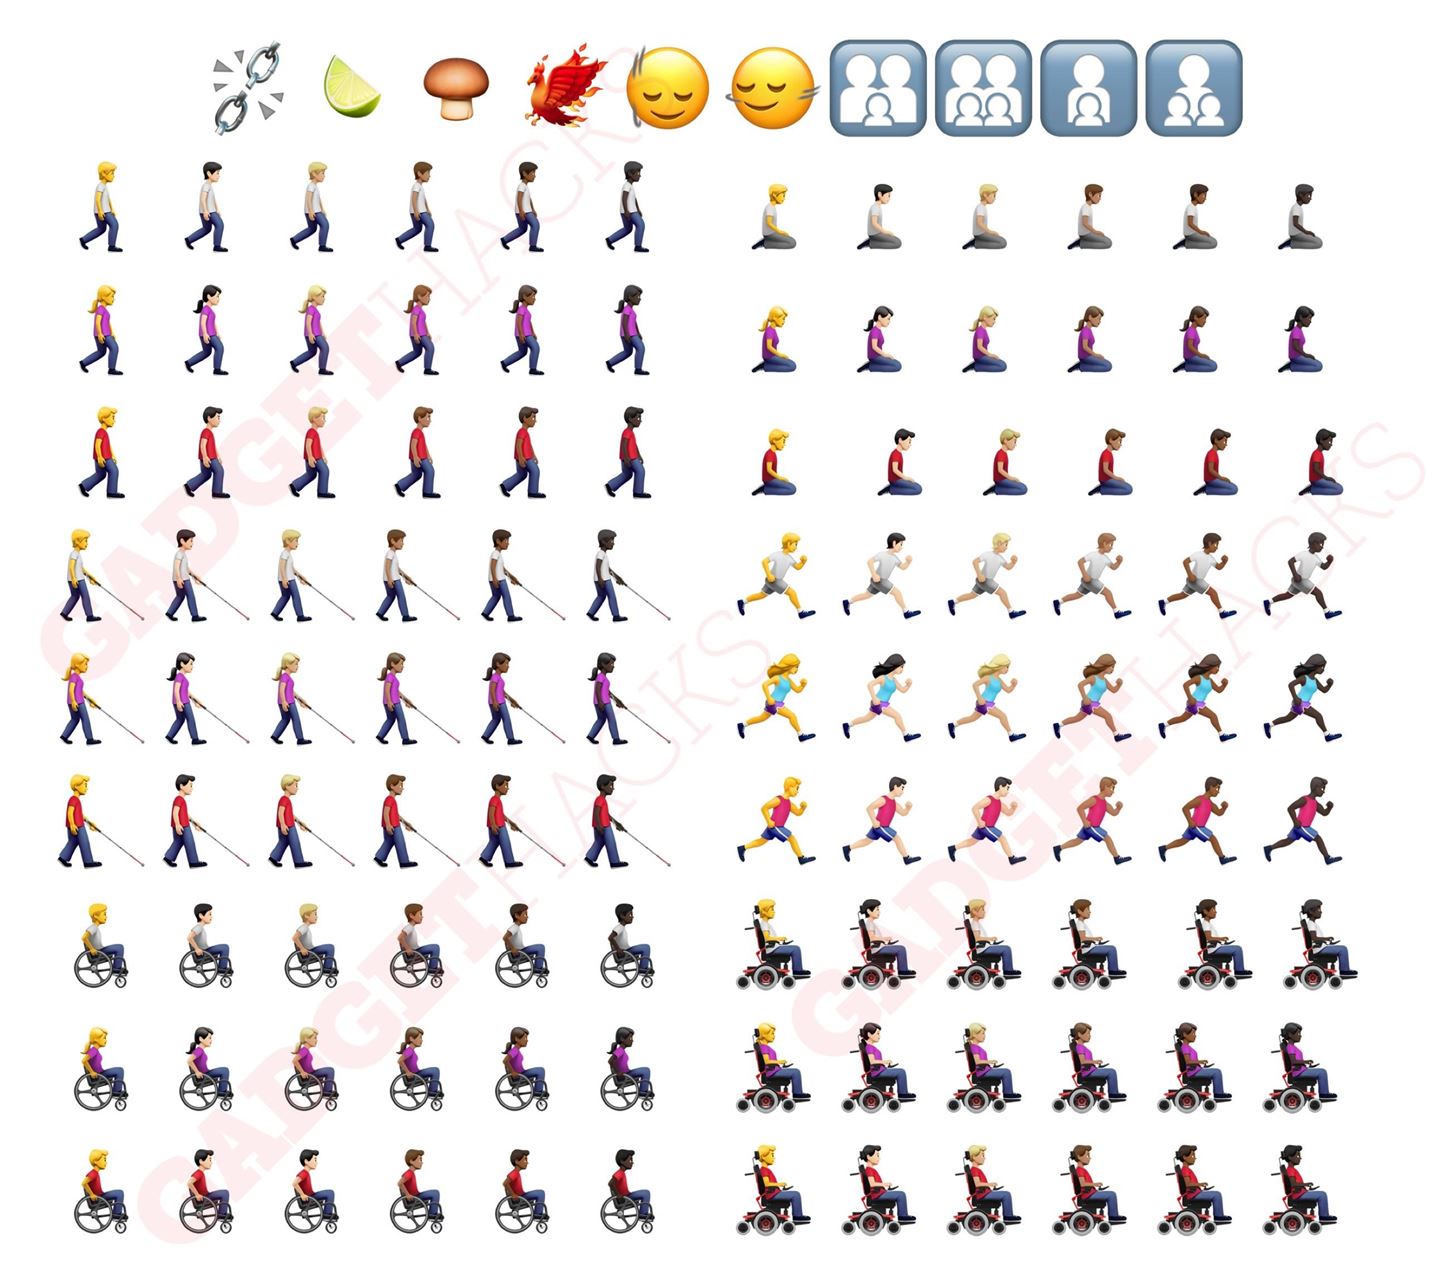 Your iPhone's Getting 118 More Emoji — Here Are All the New Characters and Variations